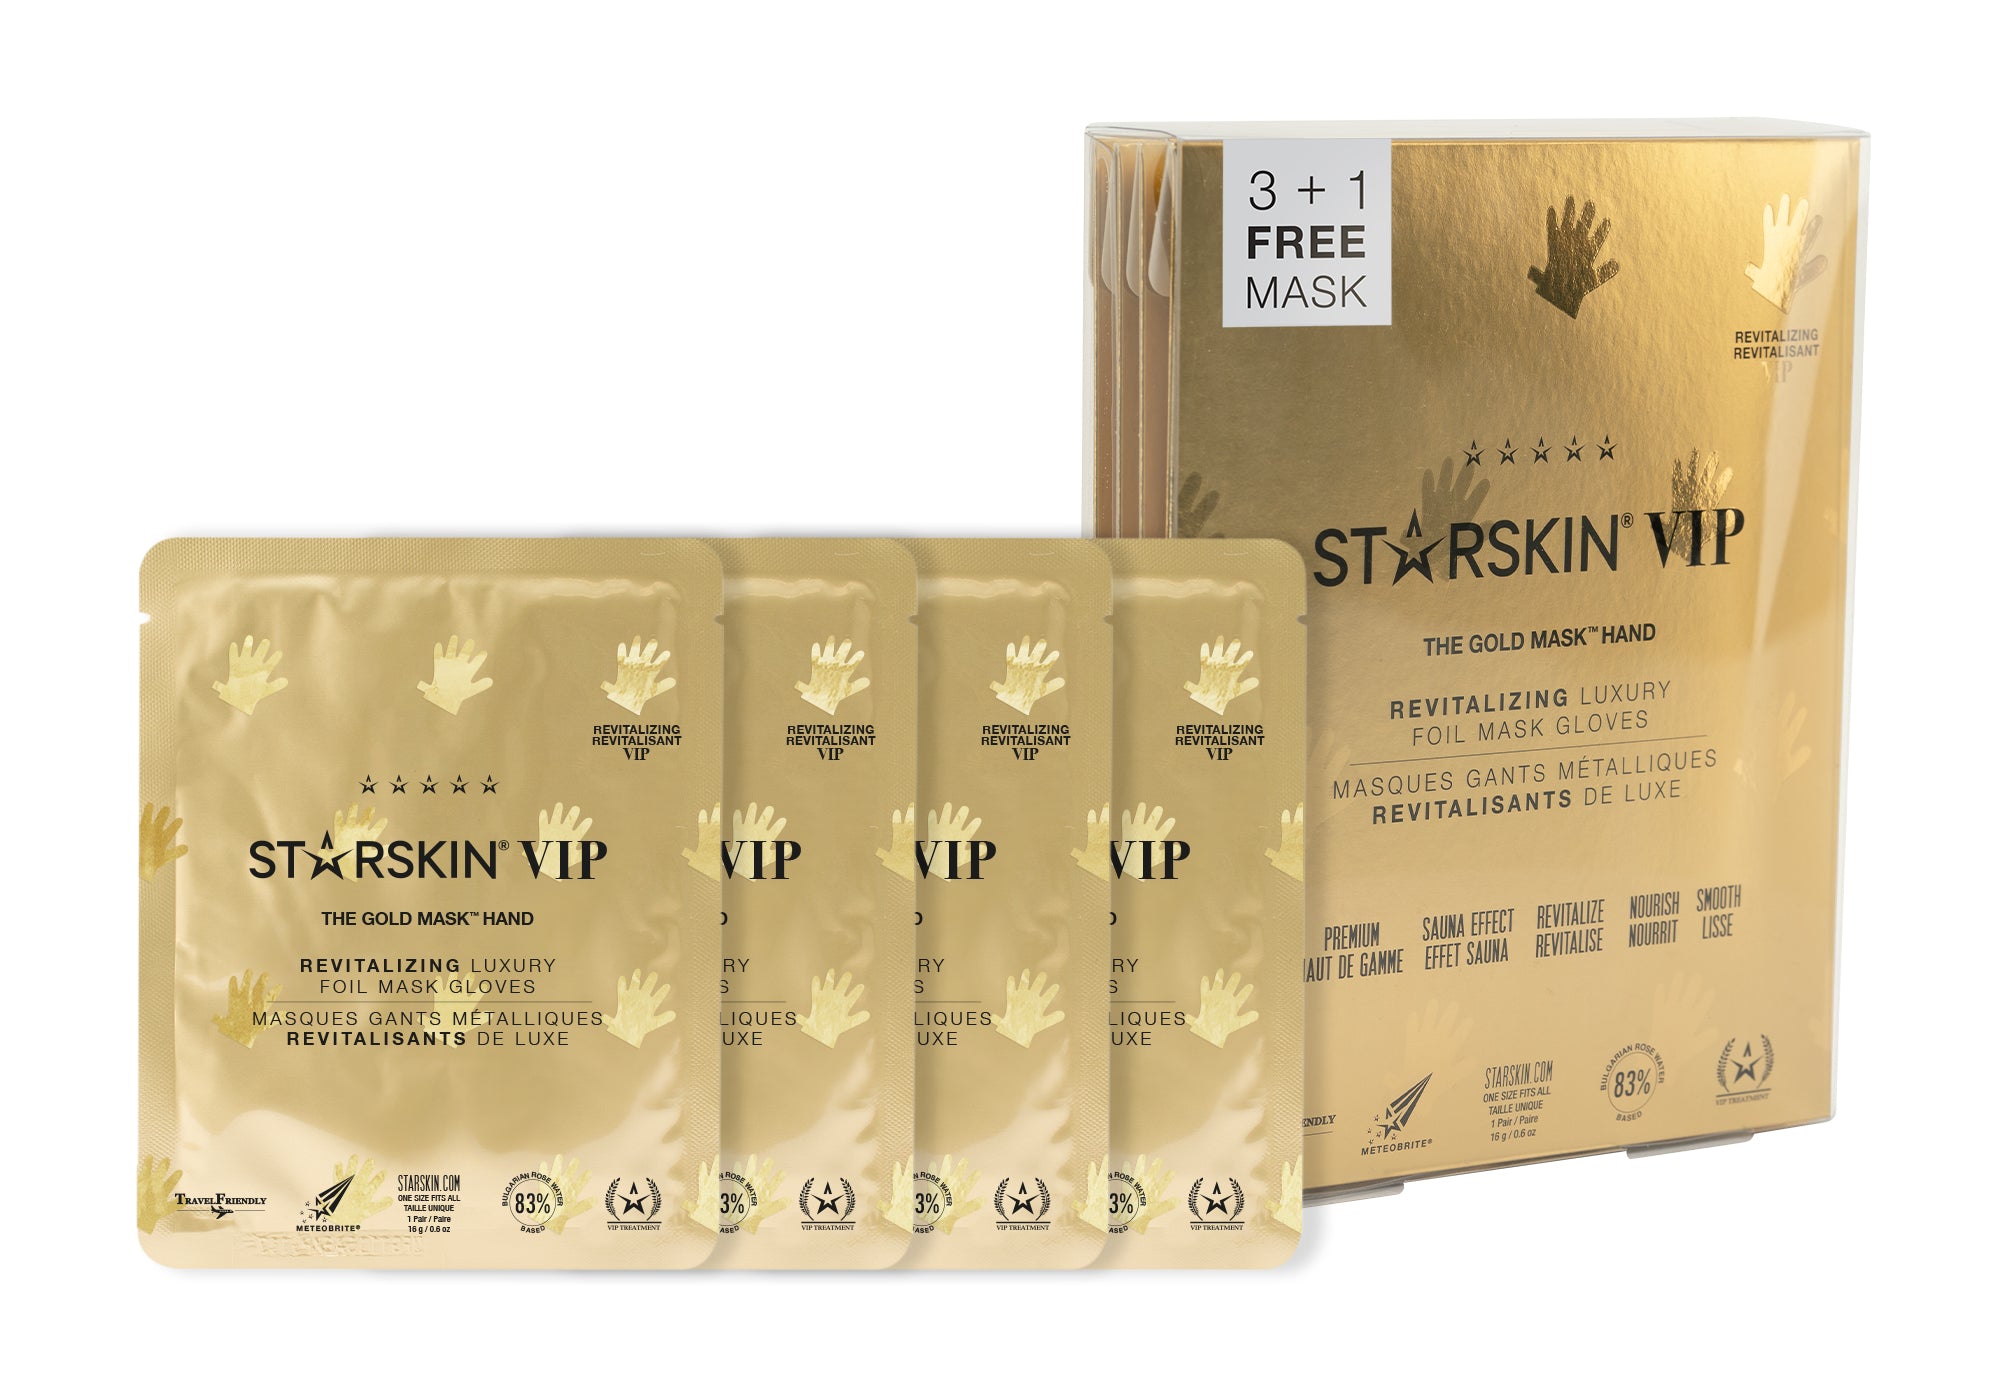 The VIP GOld Mask hand from starskin front side